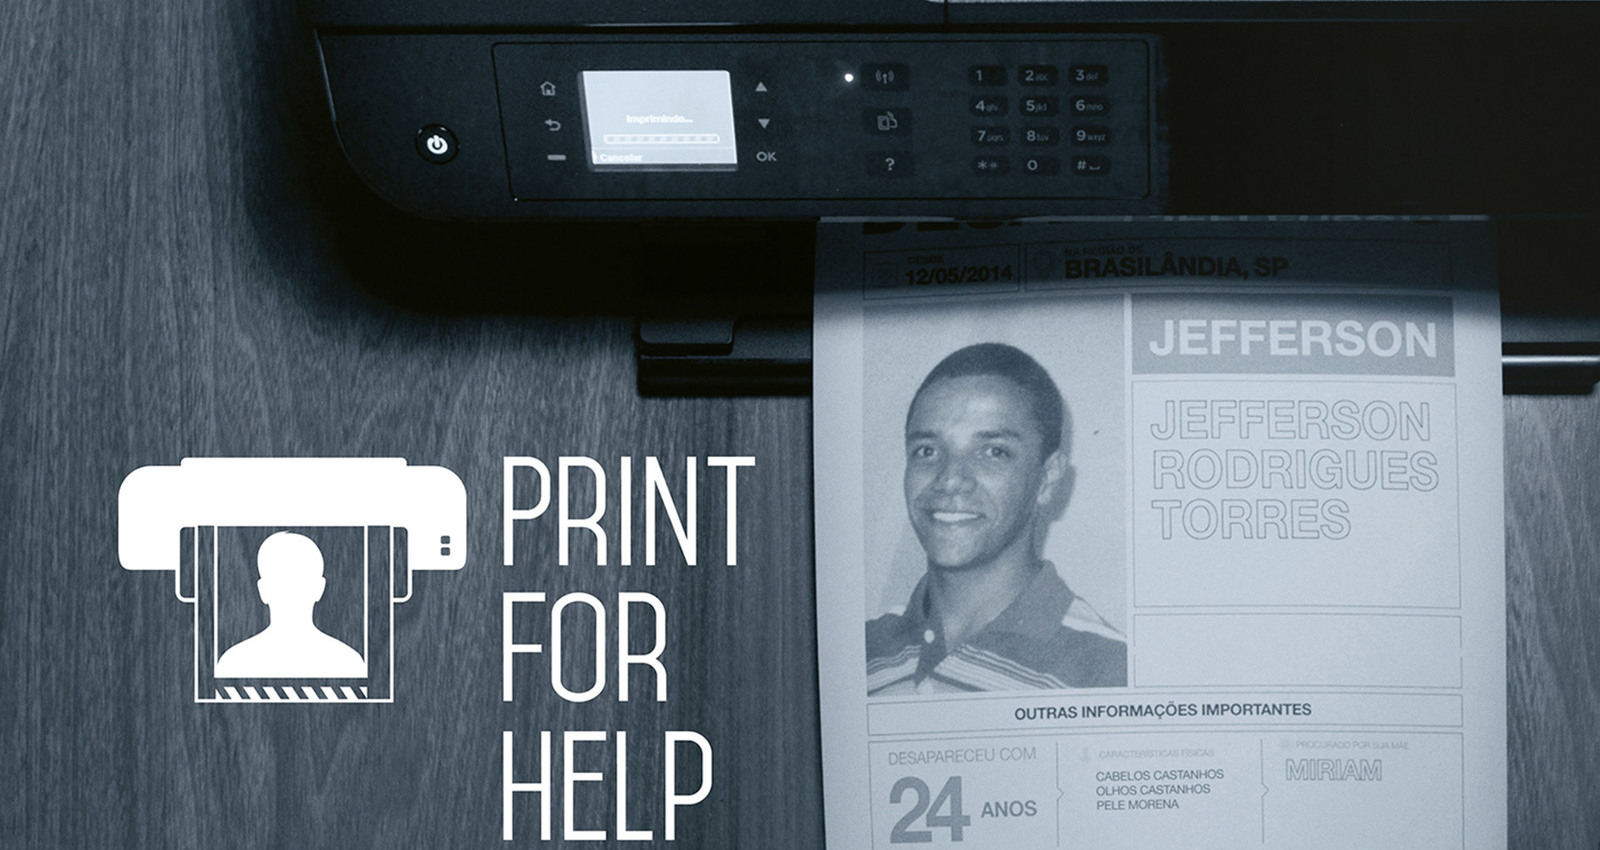 Print For Help